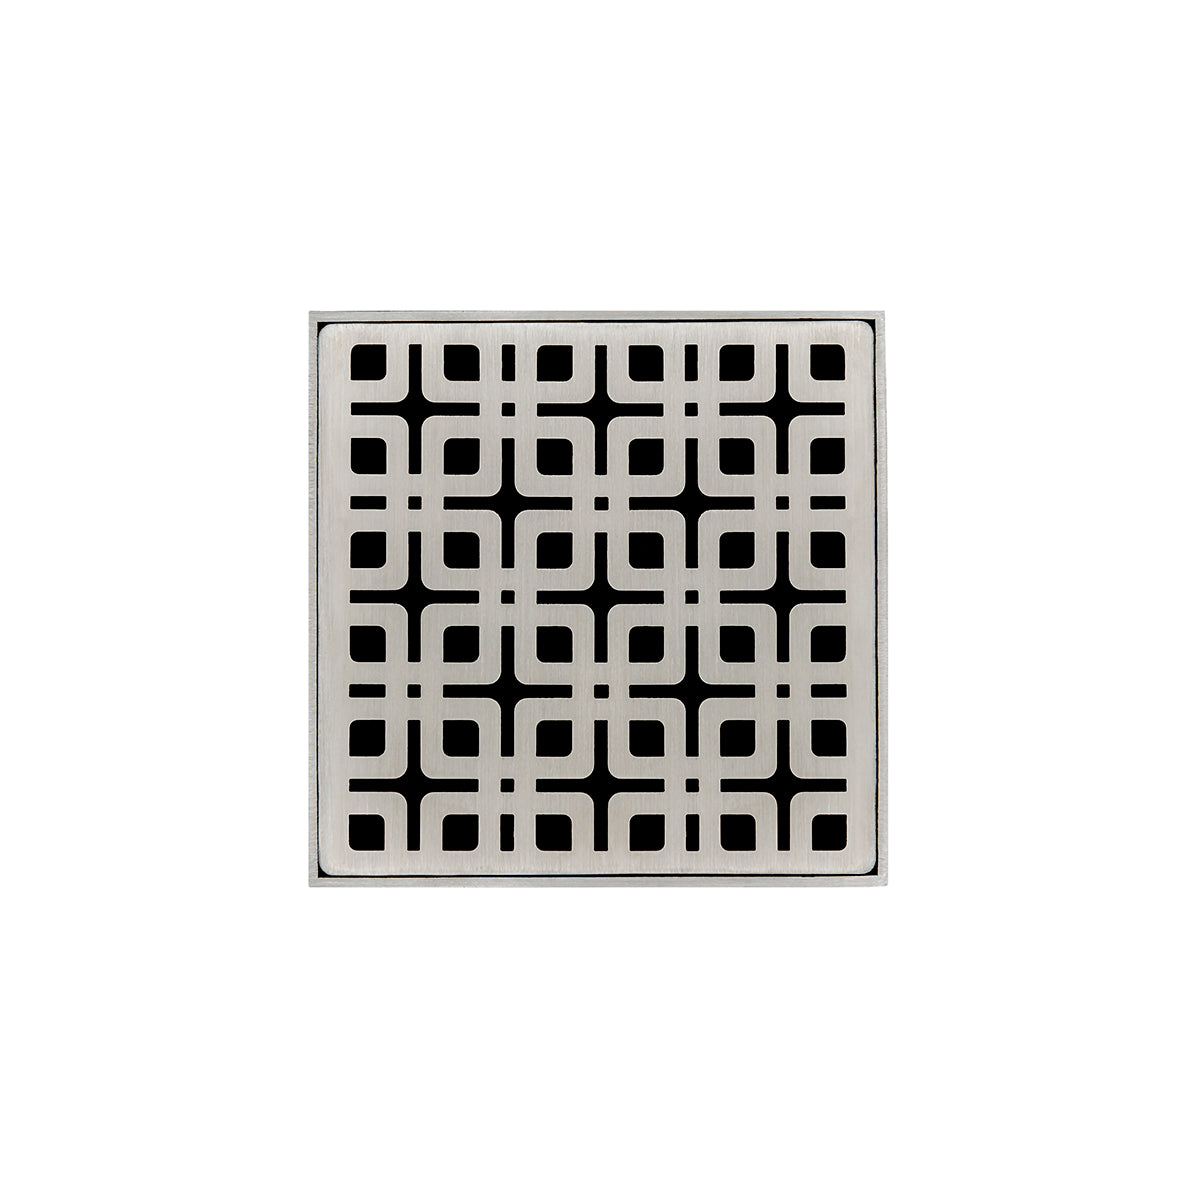 Infinity Drain 4" x 4" KD 4 Premium Center Drain Kit with Link Pattern Decorative Plate with PVC Drain Body, 2" Outlet